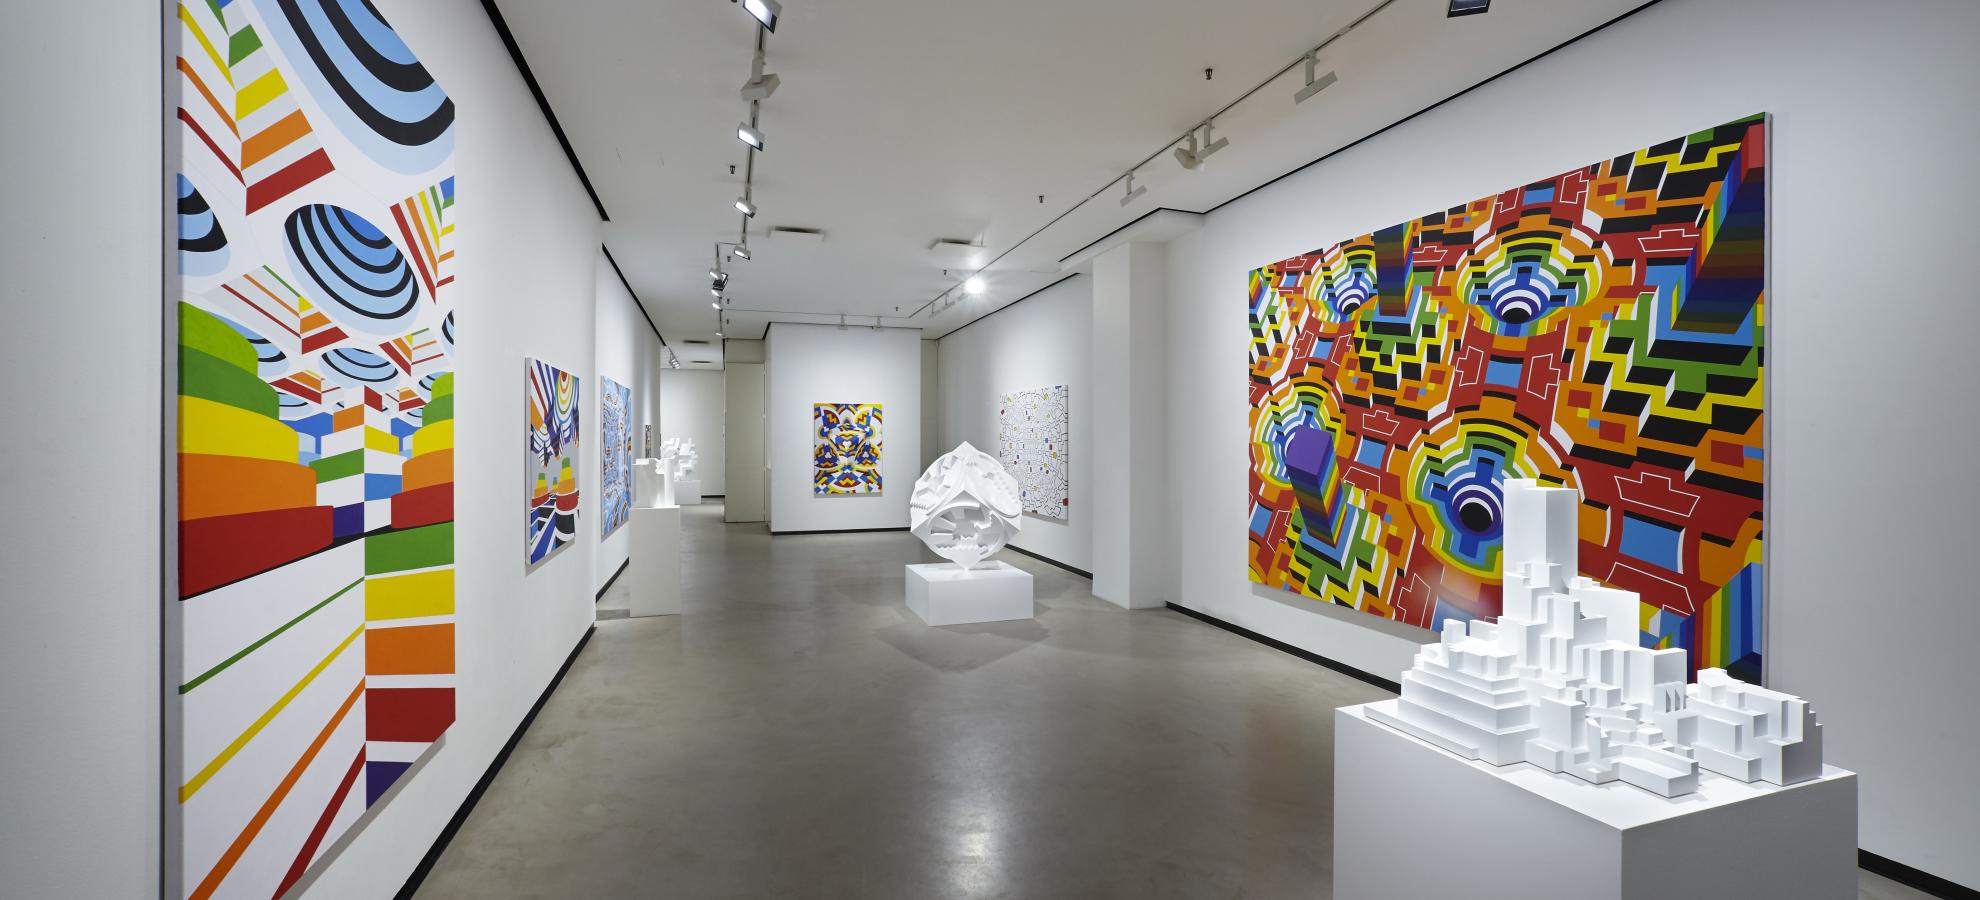 A long and wide corridor stretches ahead, on either side are large colourful paintings by Alvar Gullichsen. In the middle of the corridor are two plinths holding pure white geometrical sculptures.